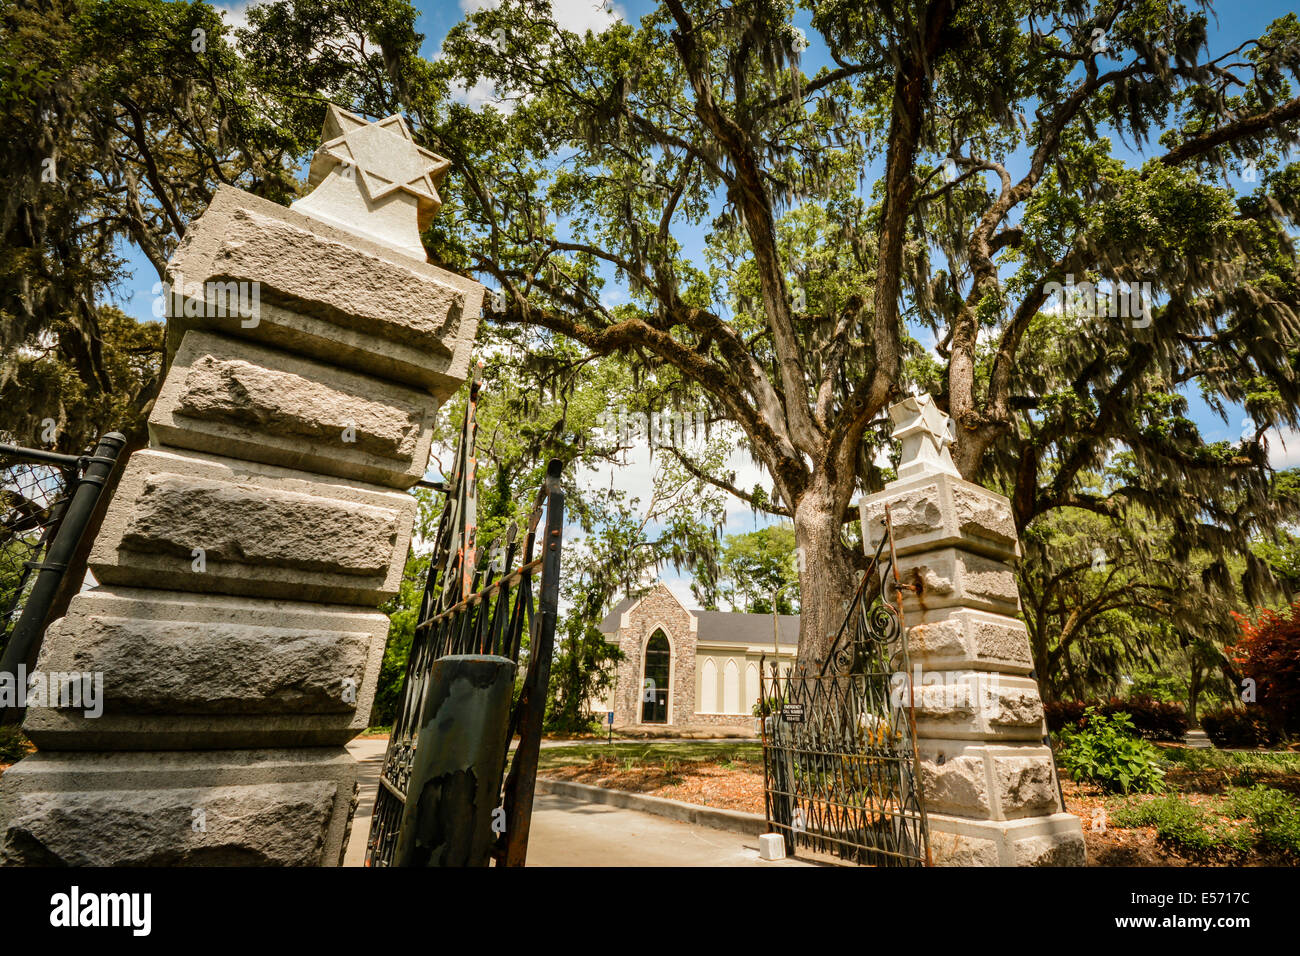 The Jewish Cemetery Gate entrance section of the Bonaventure Cemetery in Savannah, GA, USA Stock Photo